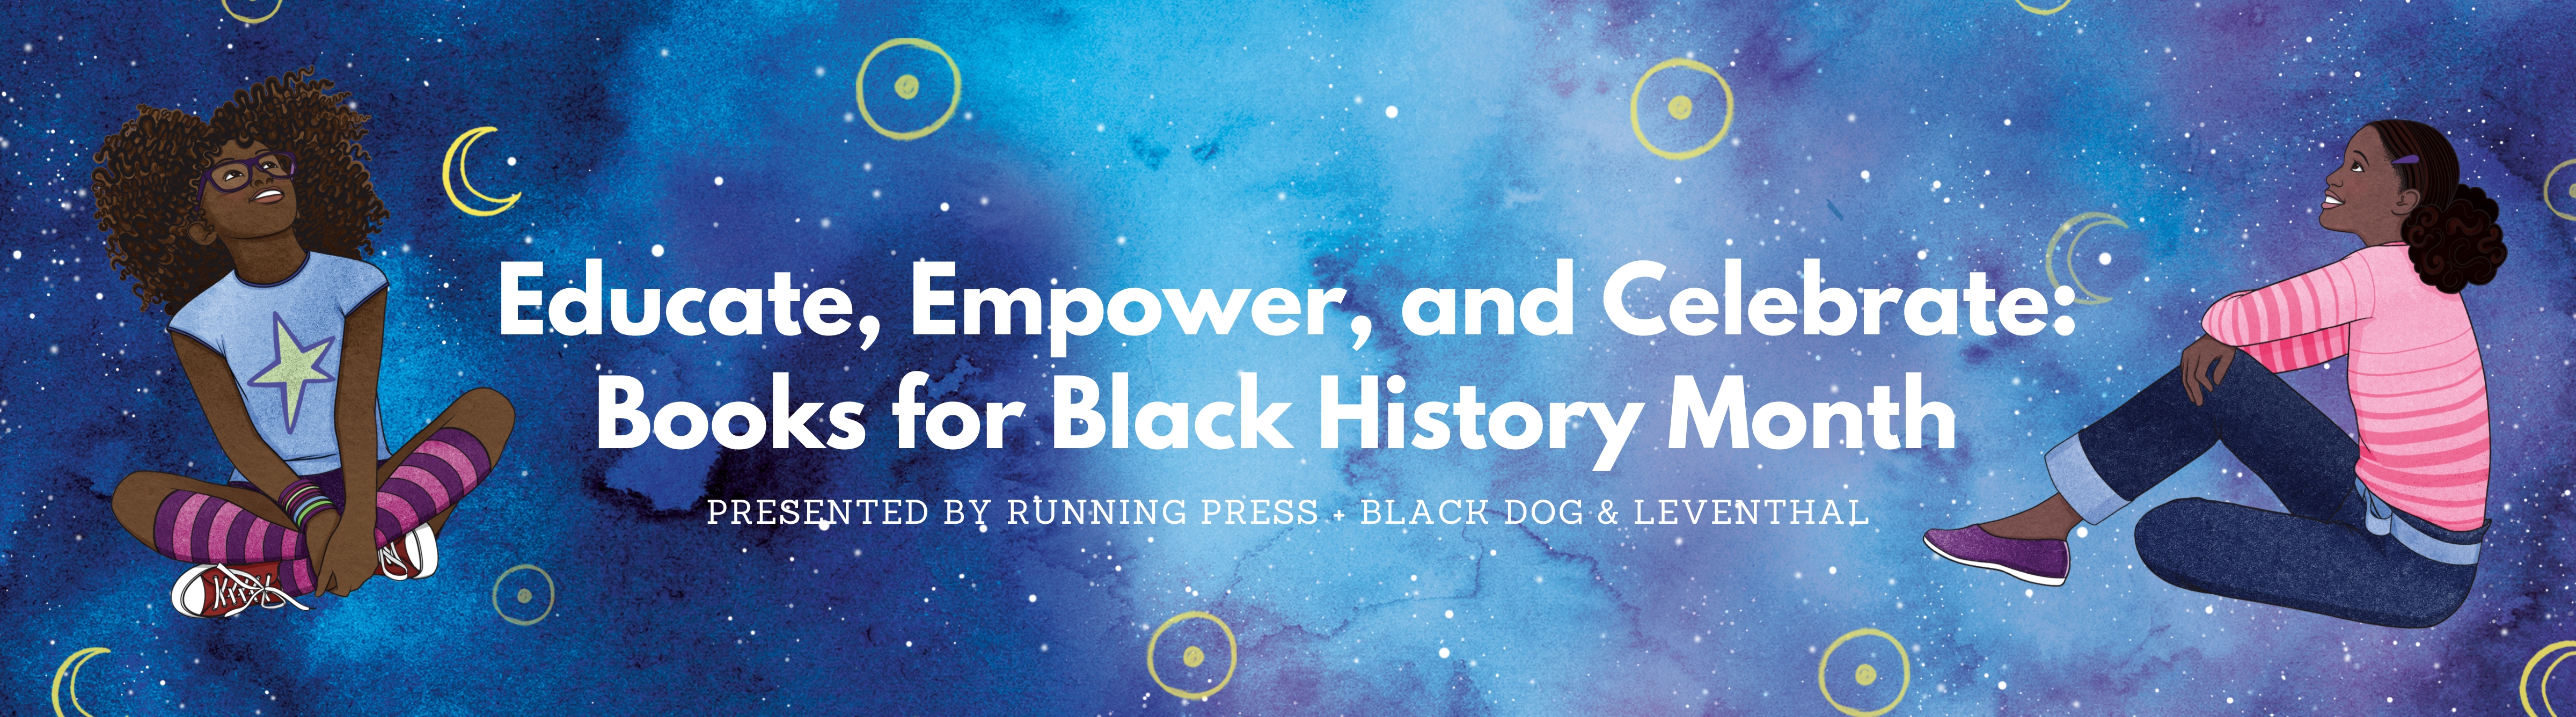 Banner featuring illustrations of two young Black girls looking to the stars from "Astrology for Black Girls" by Jordannah Elizabeth. The banner reads "Educate, Empower, and Celebrate: Books for Black History Month: Presented by Running Press + Black Dog & Leventhal."